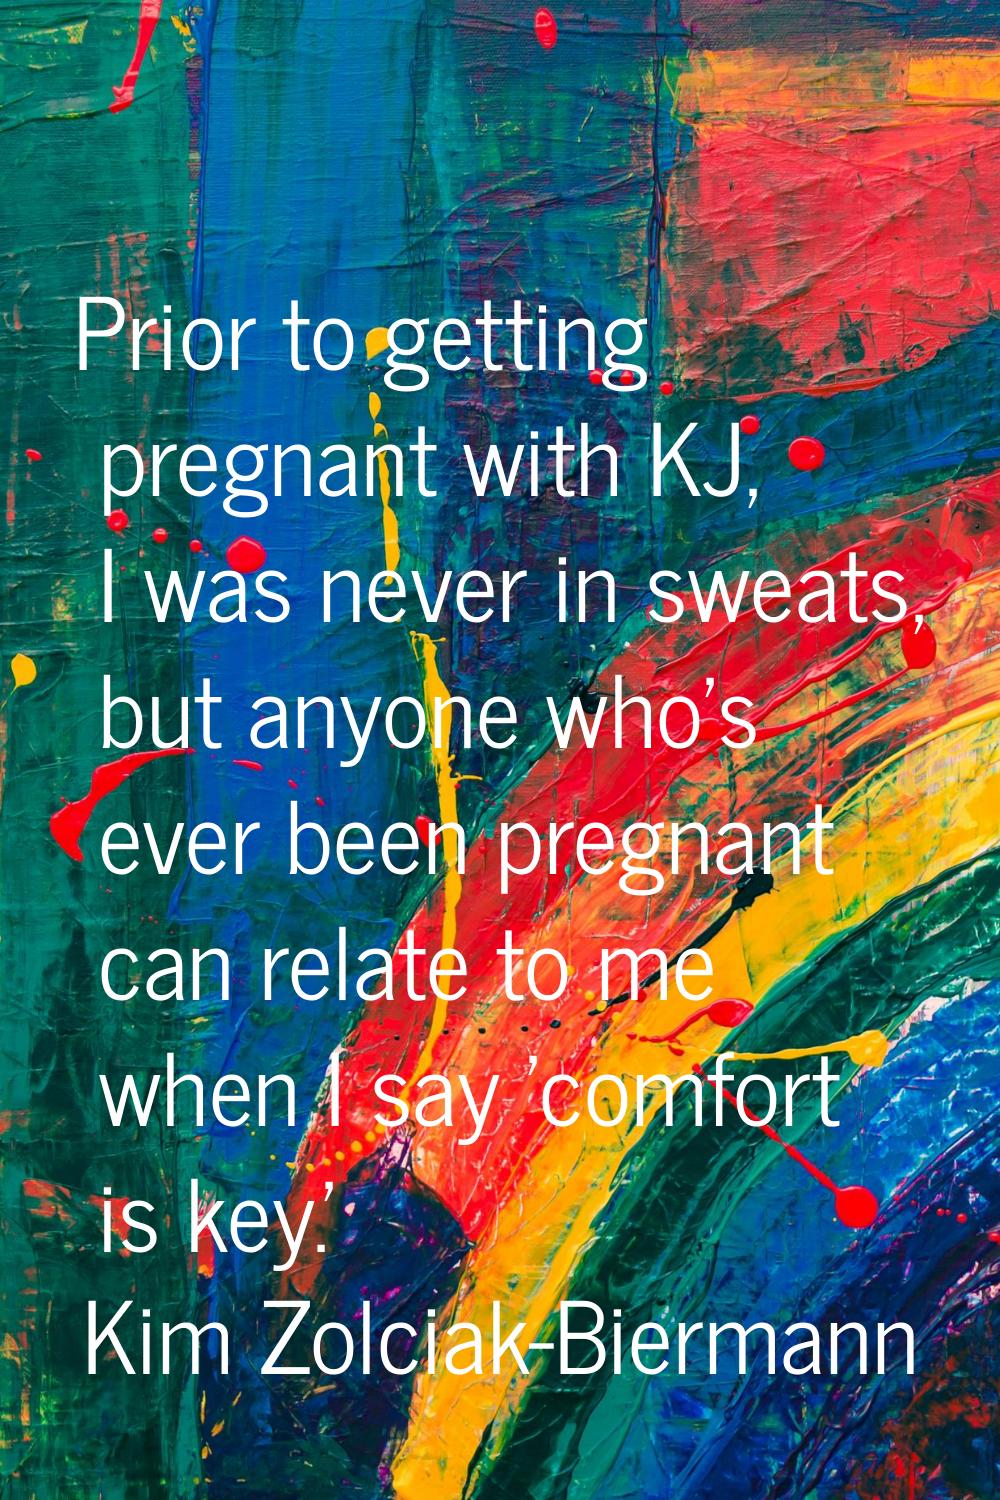 Prior to getting pregnant with KJ, I was never in sweats, but anyone who's ever been pregnant can r